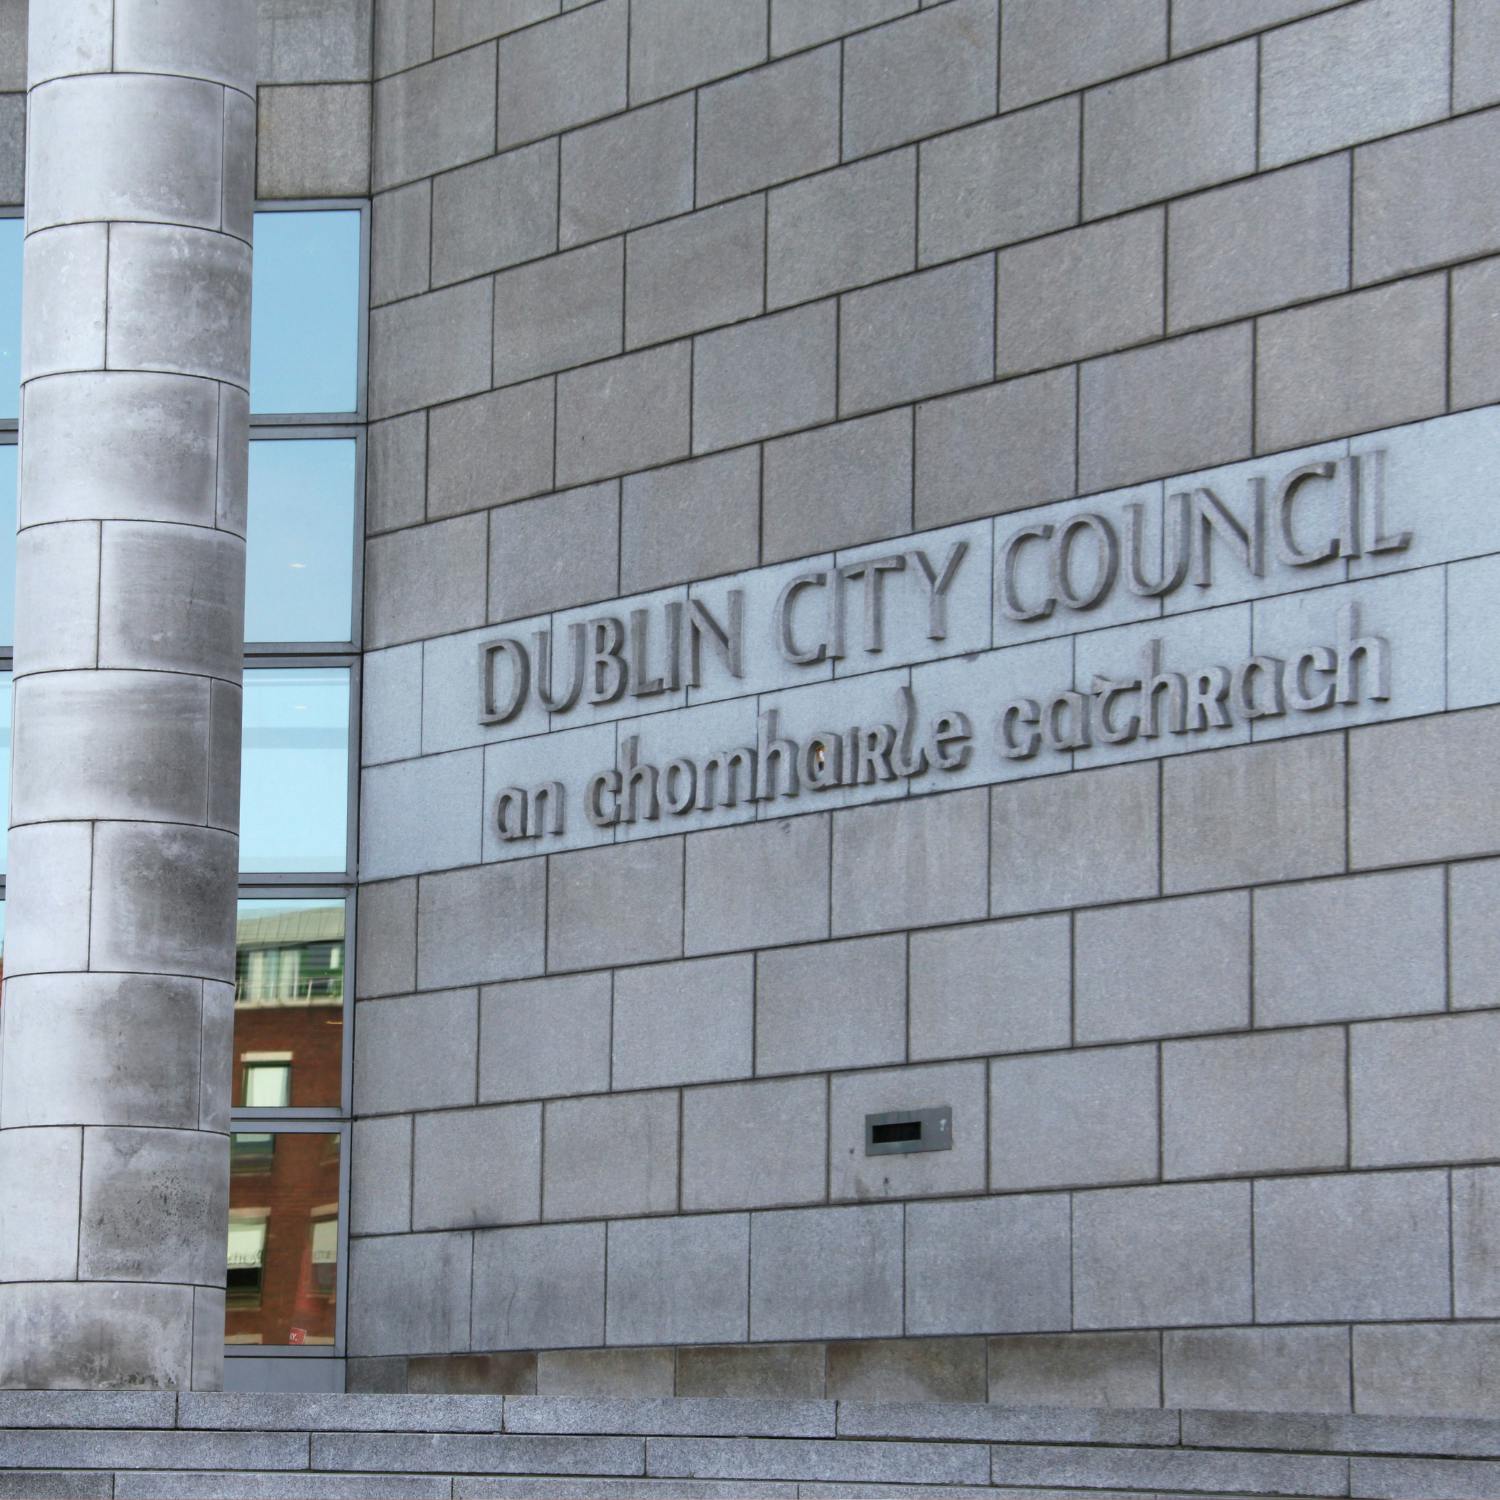 The latest on Dublin City Council’s commitment for Dublin 8 playing pitch forlocalkids